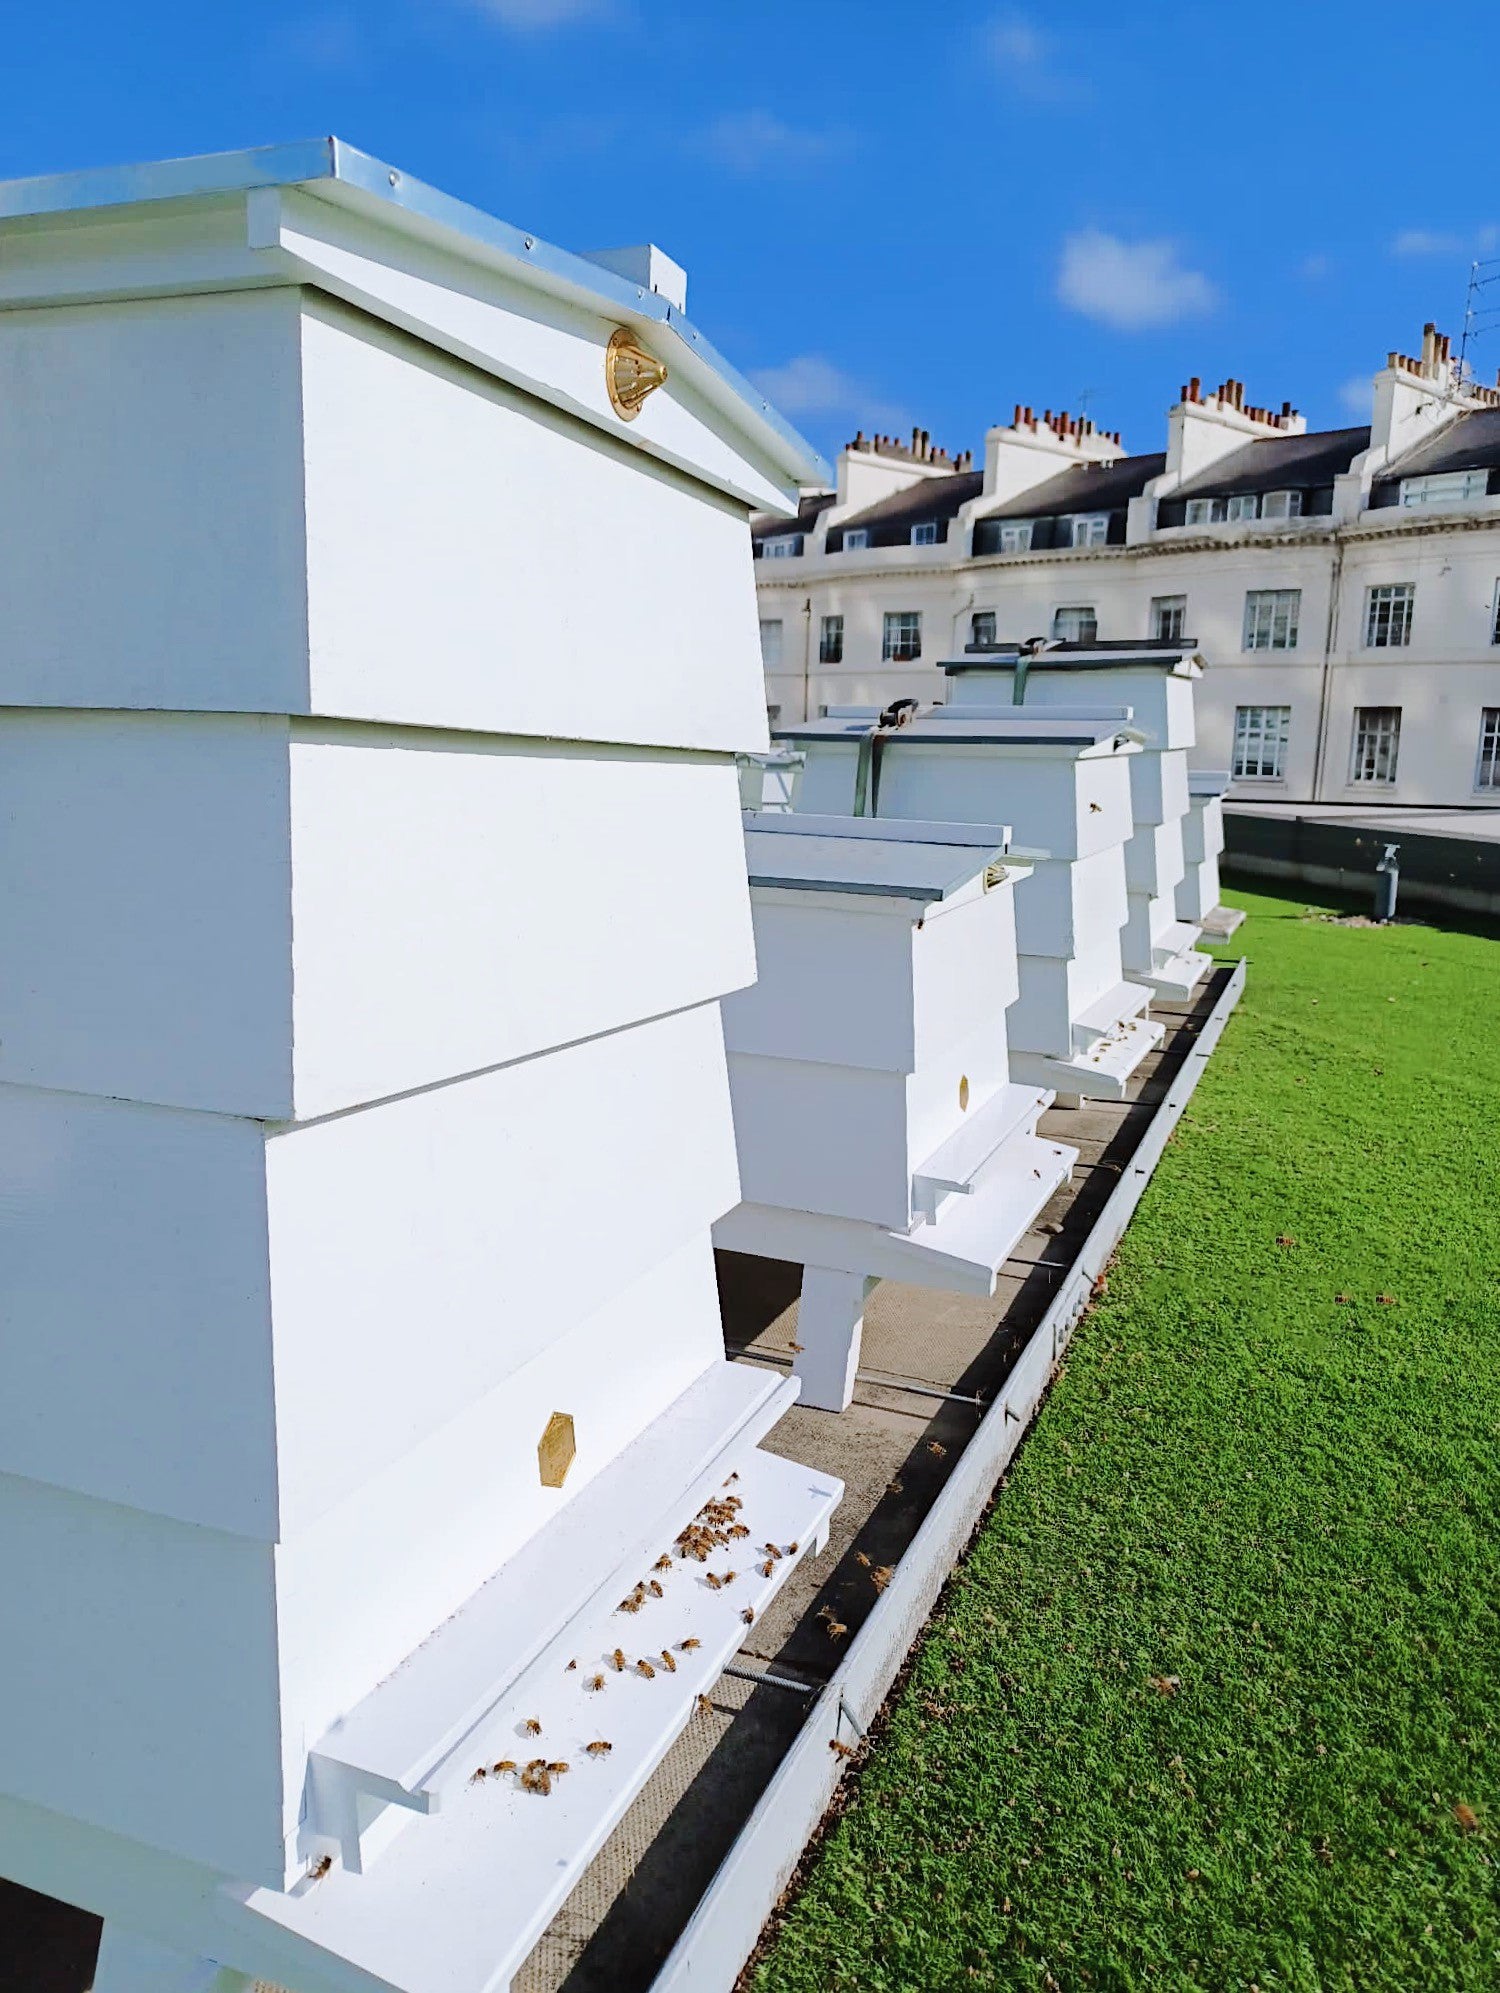 Hive mind: The beehives on the roof